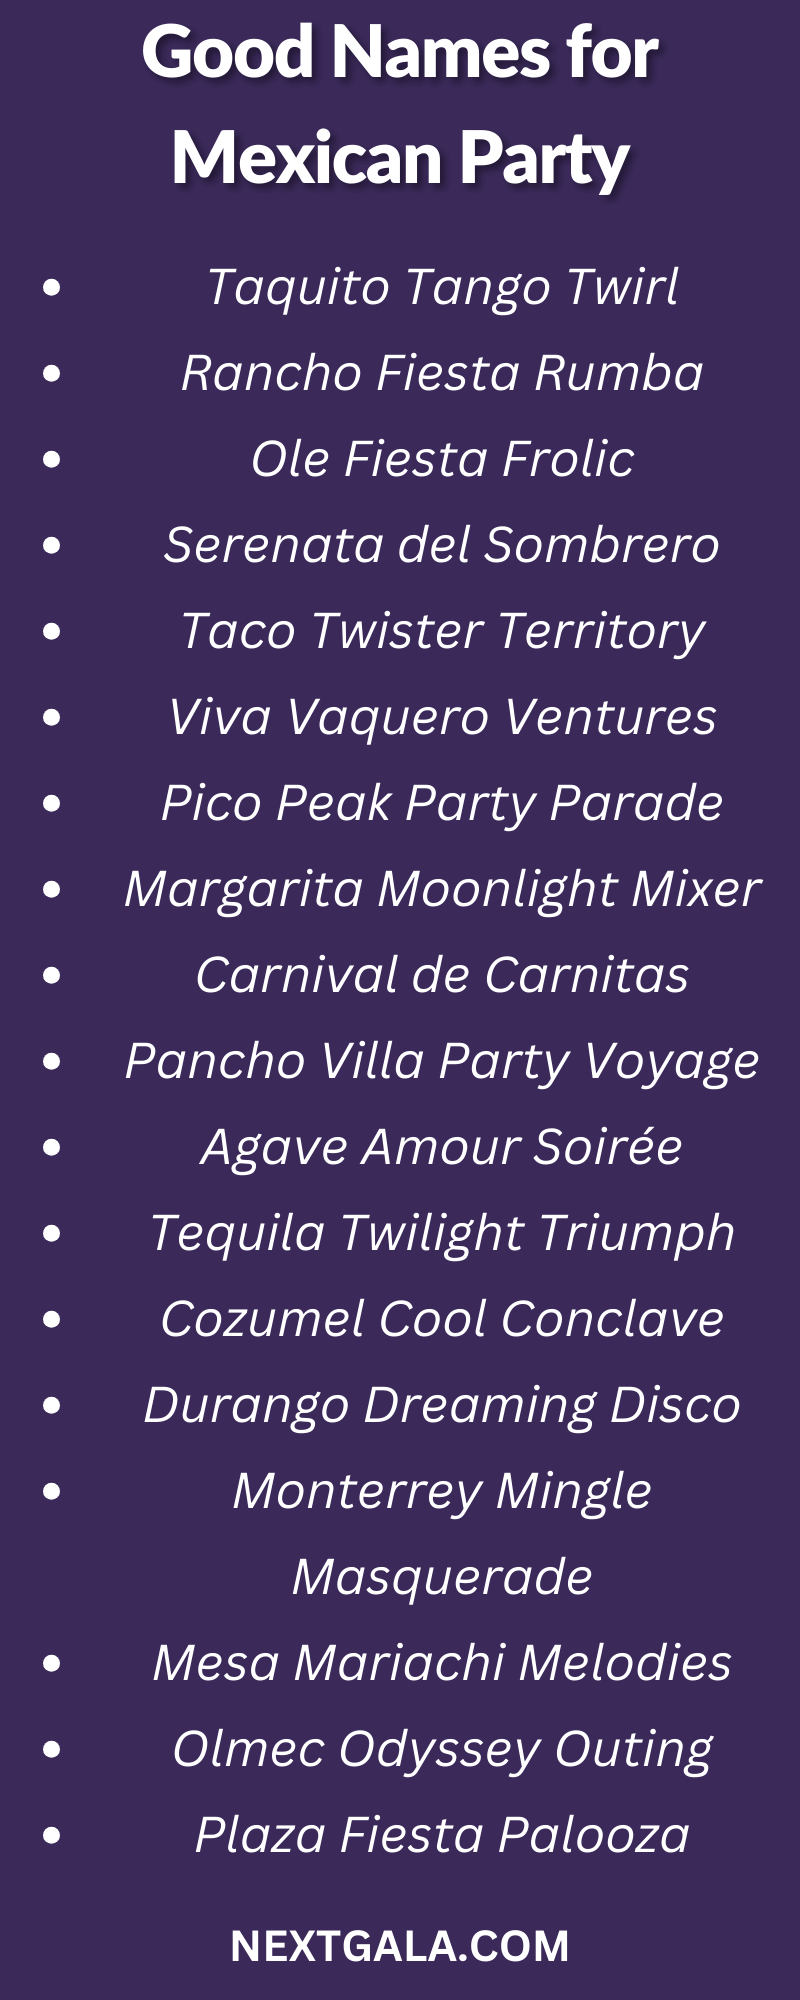 Good Names for Mexican Party